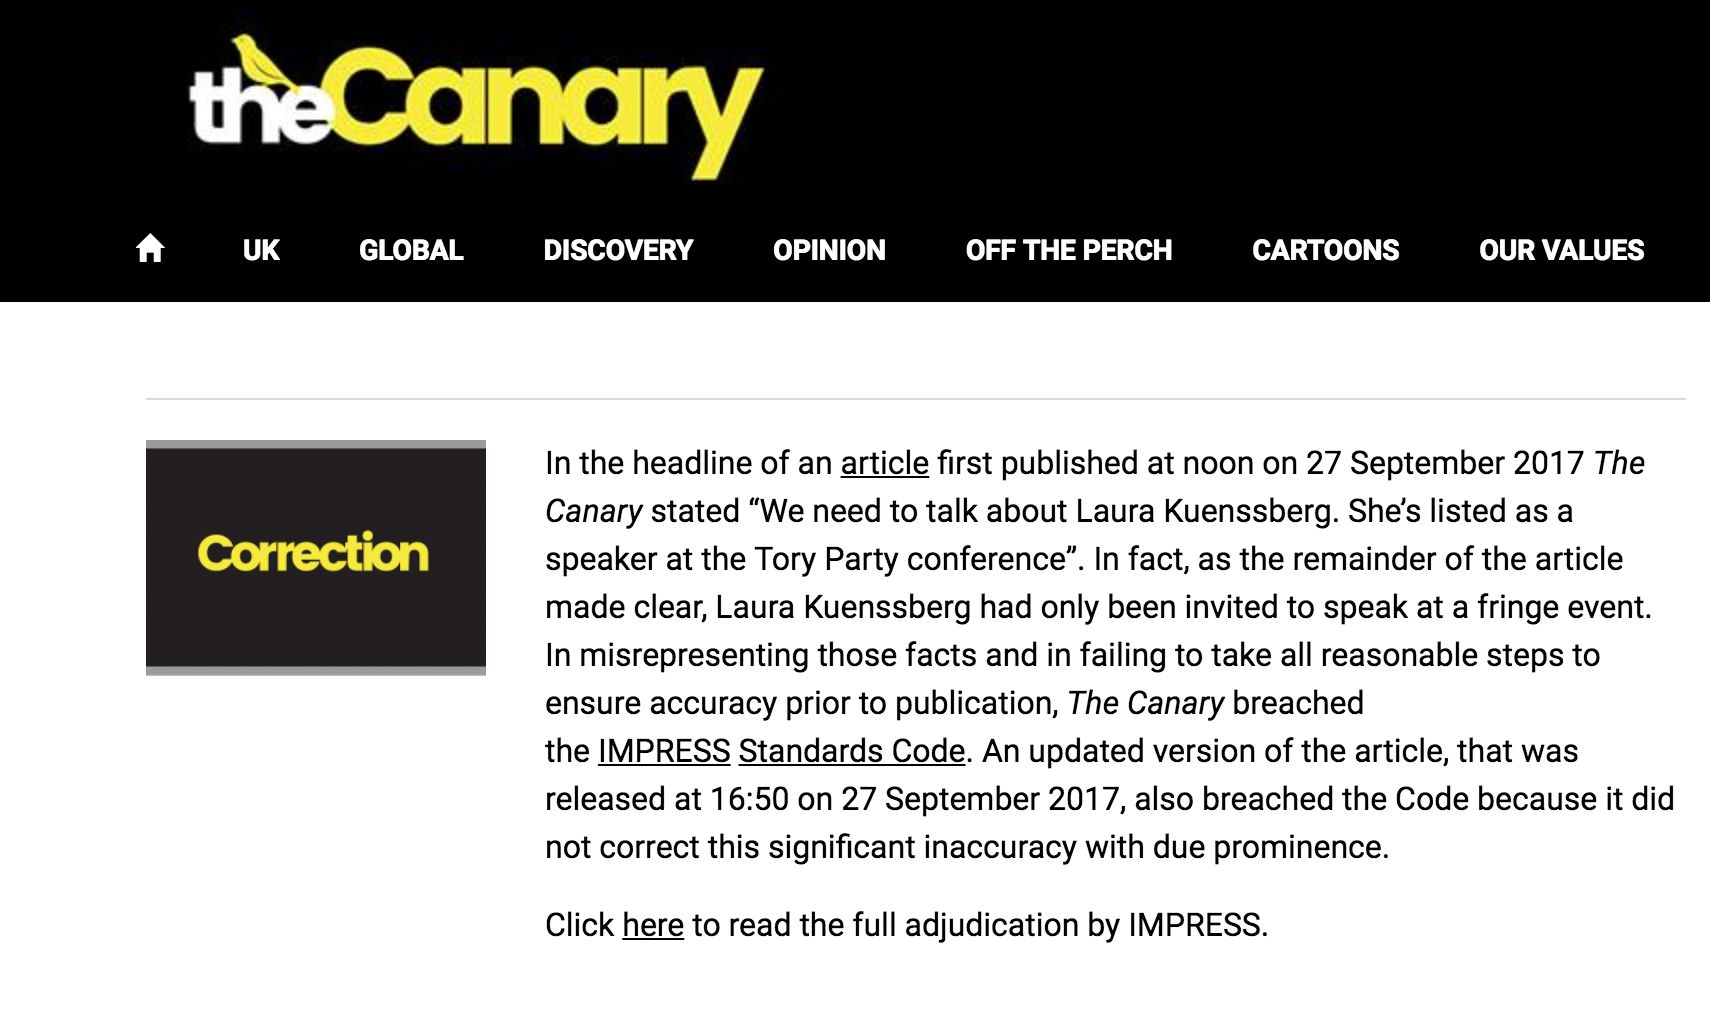 <strong>The Canary had been a front page correction to a story it wrote about BBC reporter Laura Kuenssberg</strong>